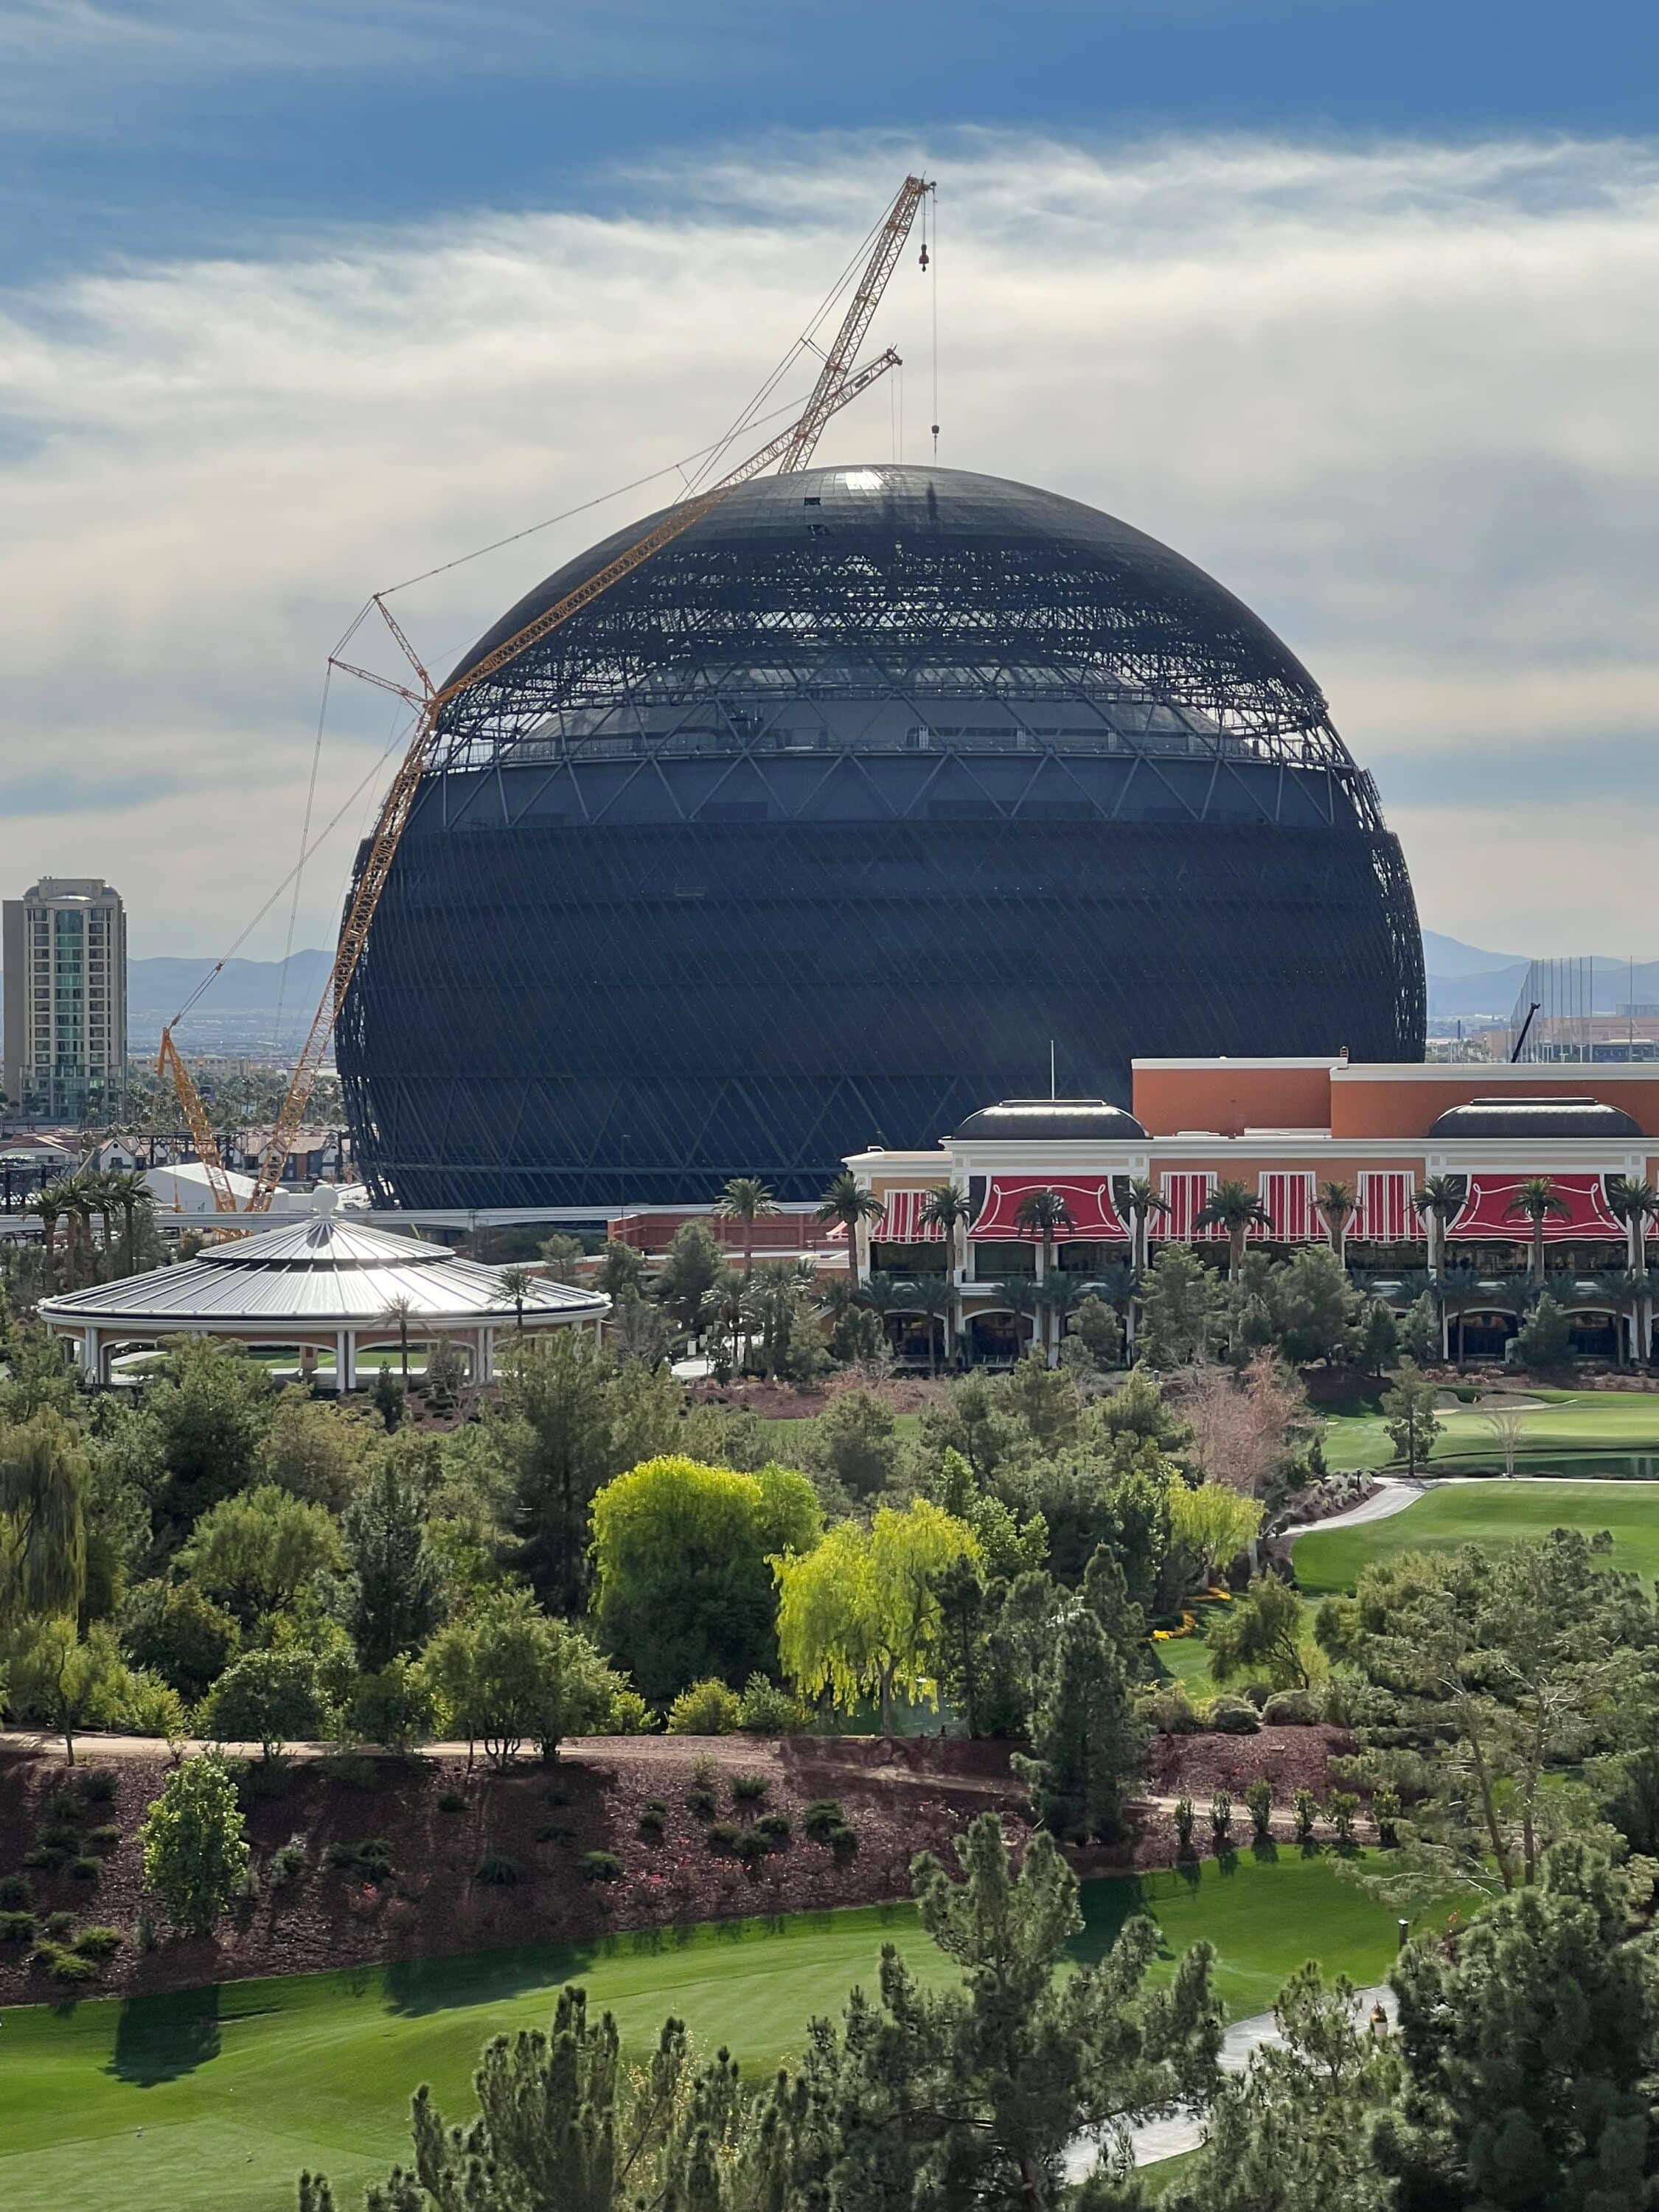 World’s largest sphere nearing completion in Las Vegas Courthouse